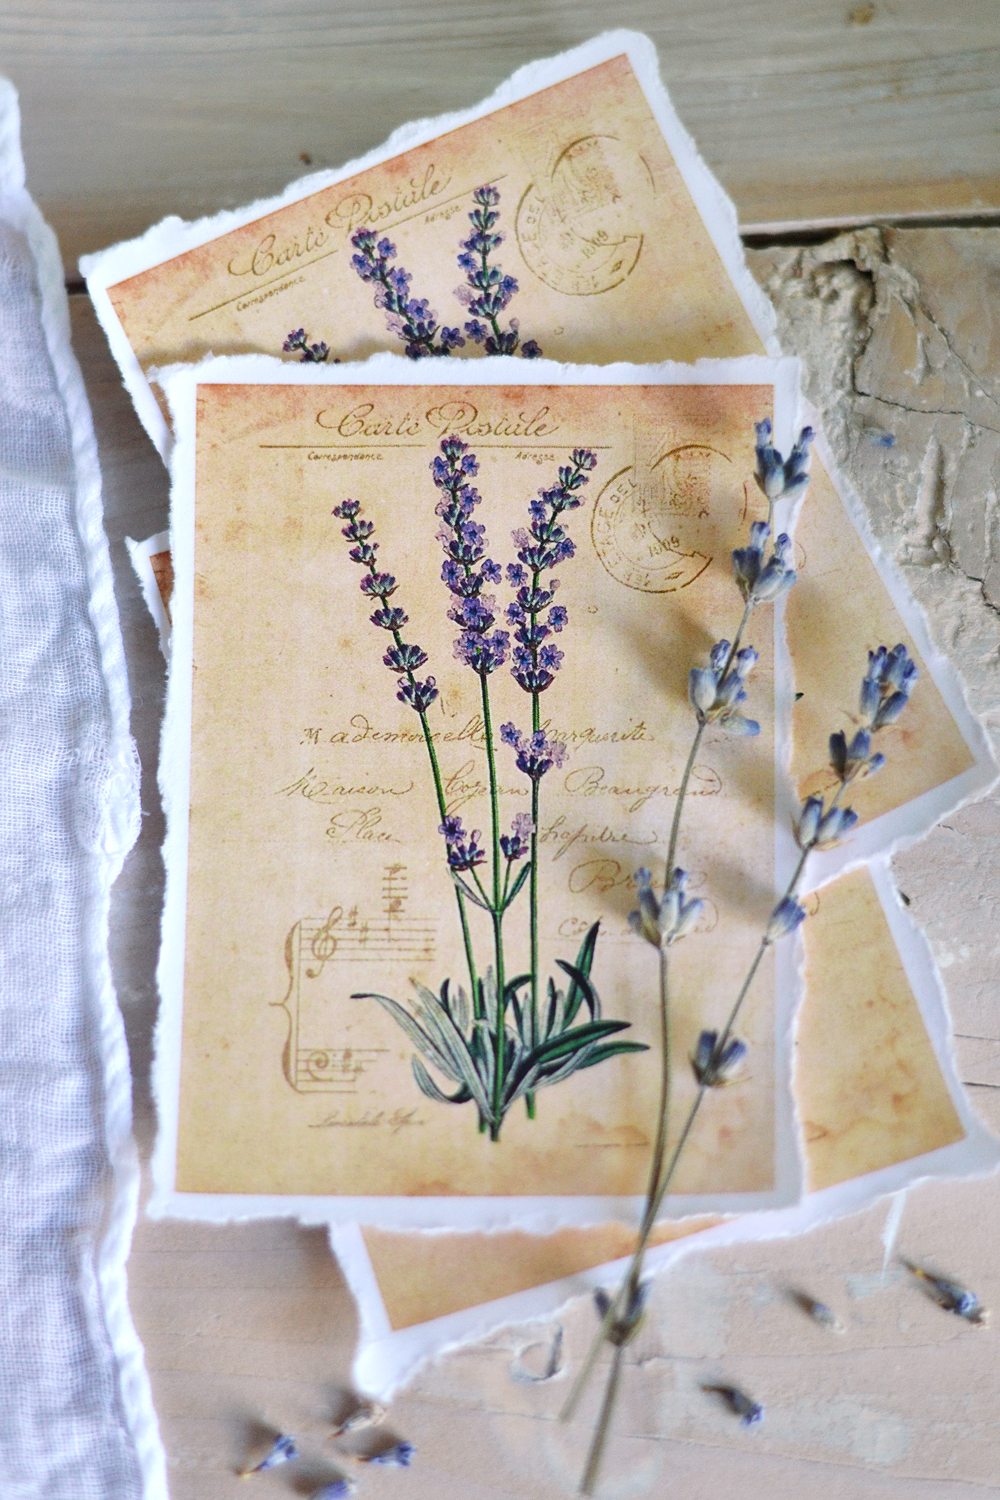 Hydrangea and Lavender vintage tags with torn edges - by Dreams Factory #diy #crafts #French #lavender #hydrangeas